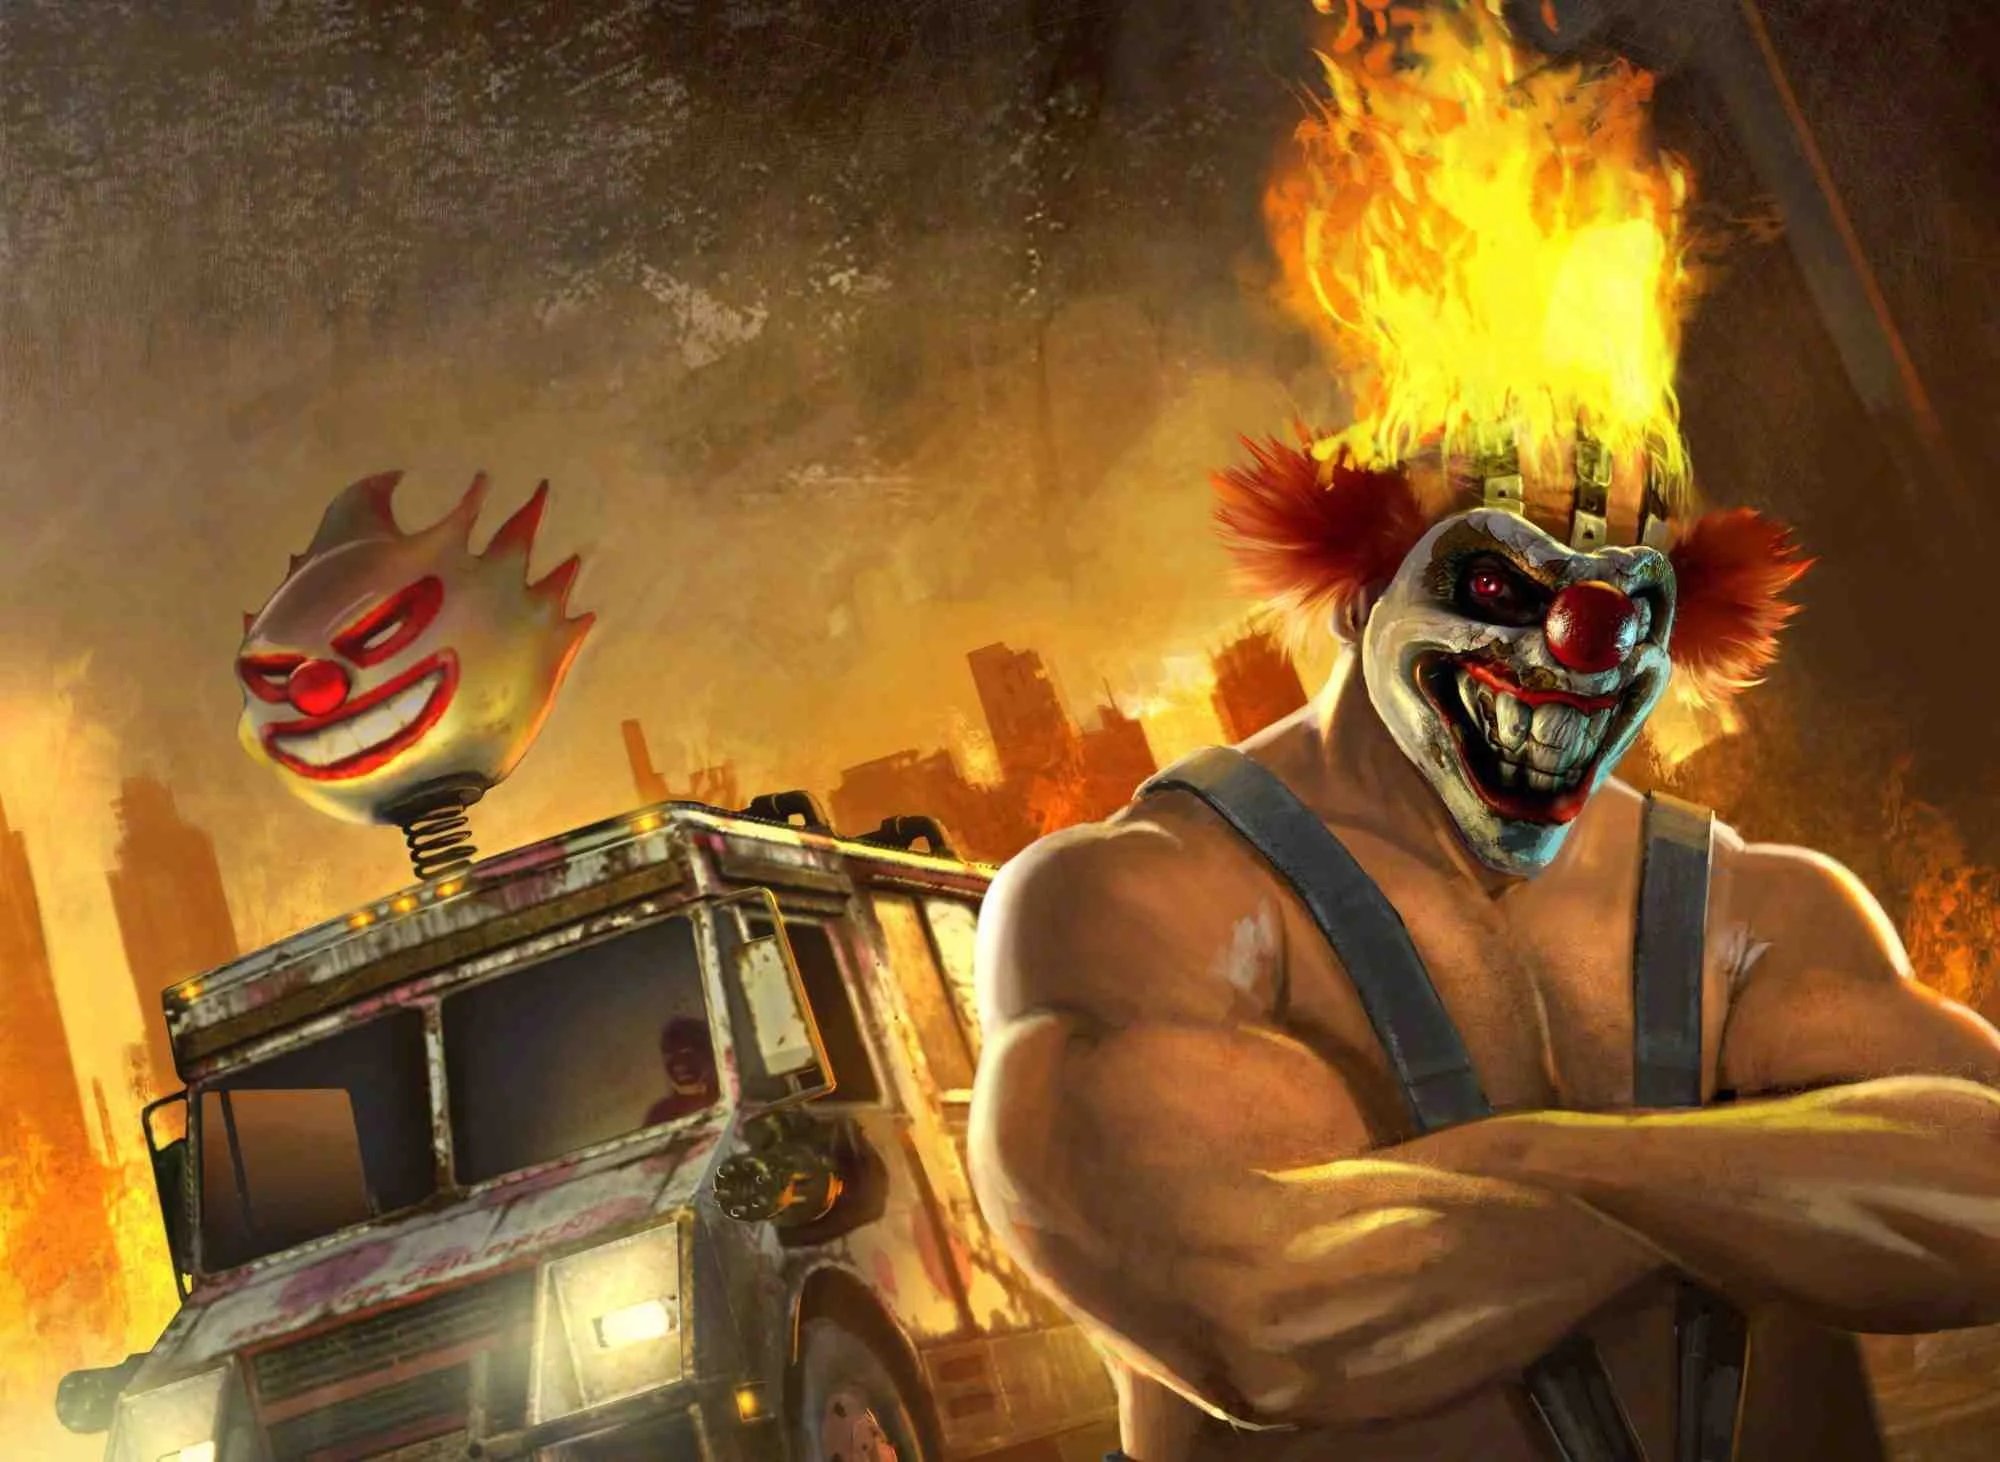 The game adaptation of the action comedy series "Twisted Metal" will be directed and executive produced by Kitao Sakurai